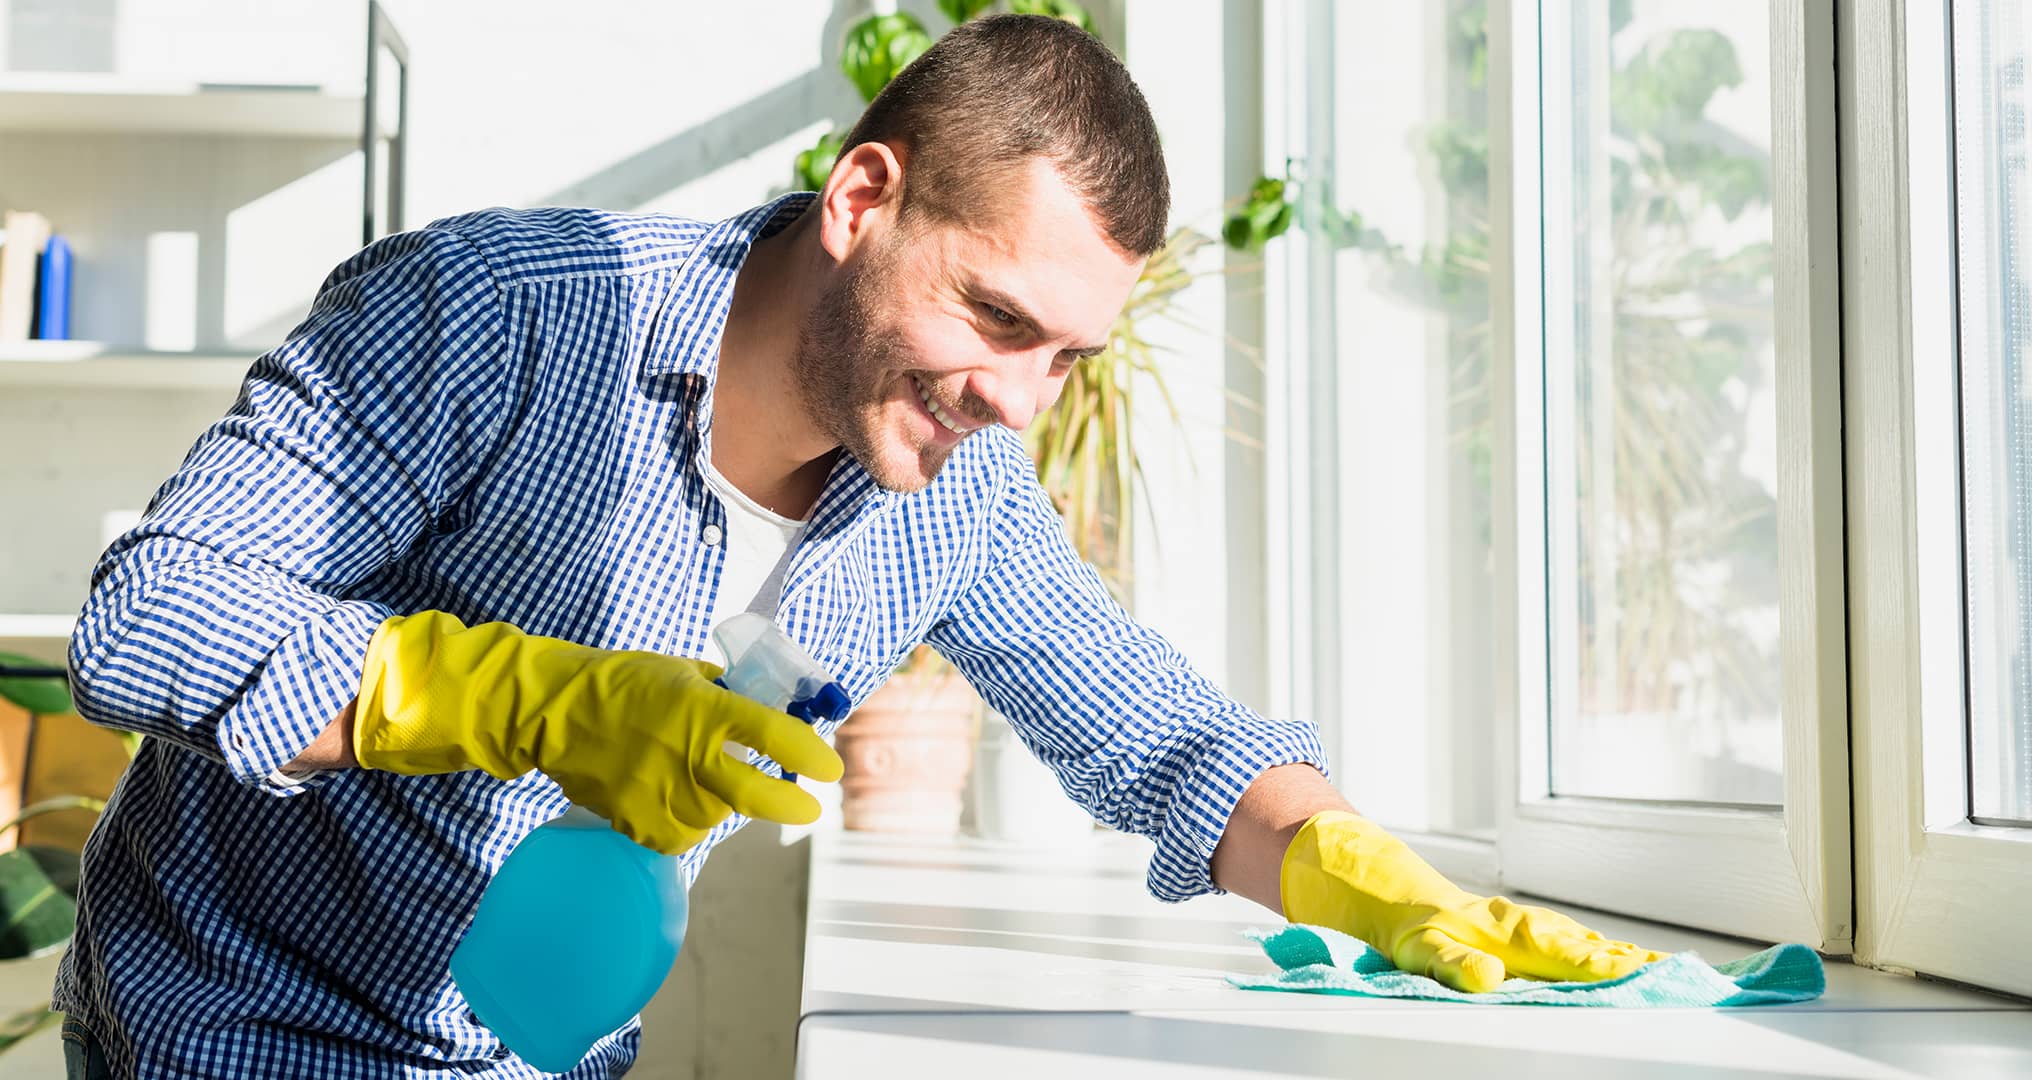 man deep cleaning office with spray bottle and cleaning gloves